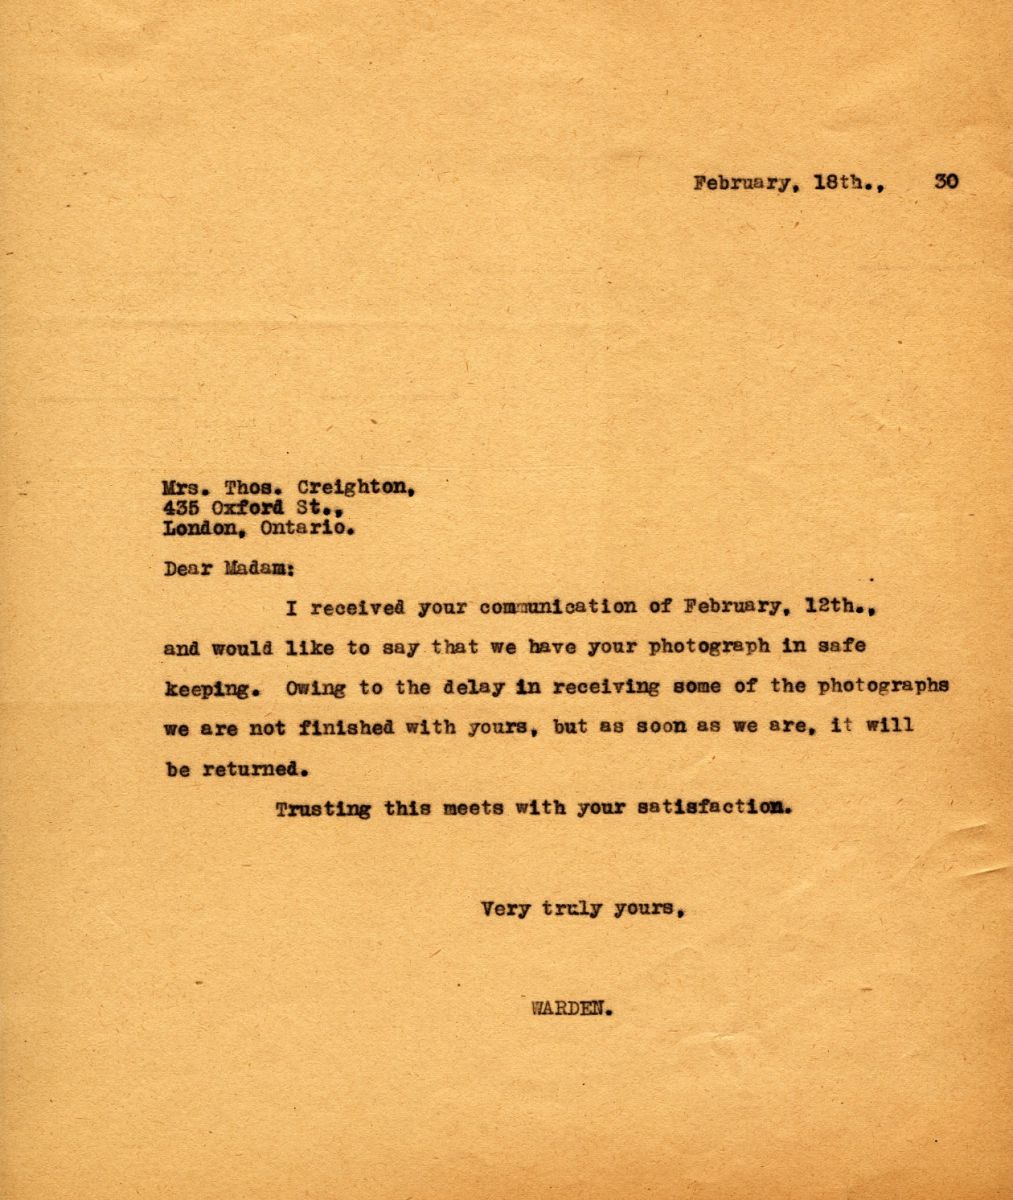 Letter from the Warden to Mrs. Thos. Creighton, 18th February 1930